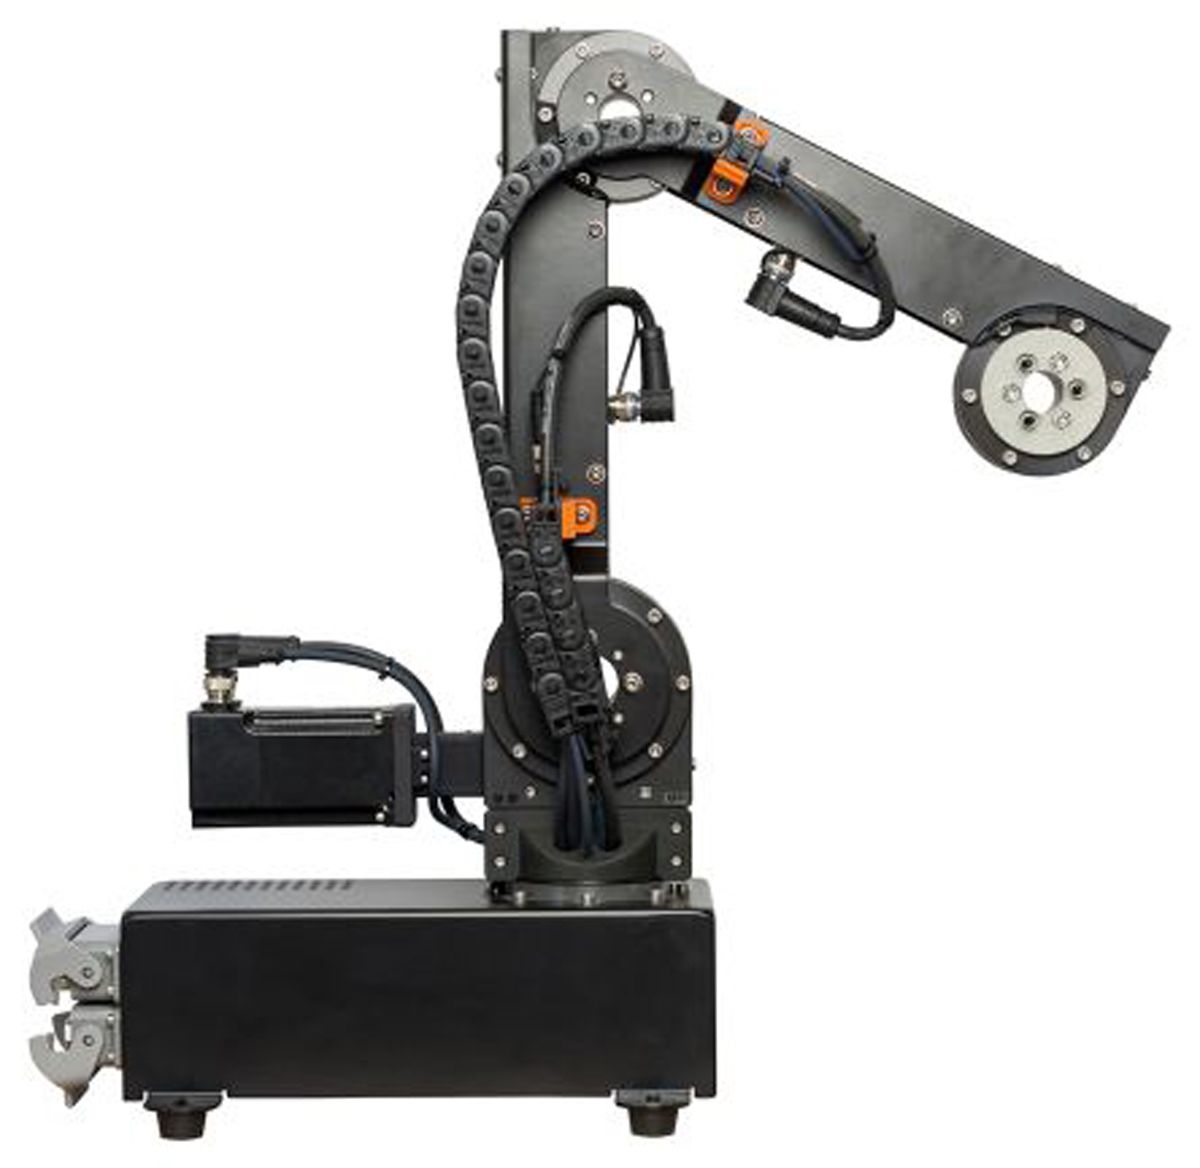 Igus 4 Axis, 1kg Payload, Bench Robotic Arm Construction Kit